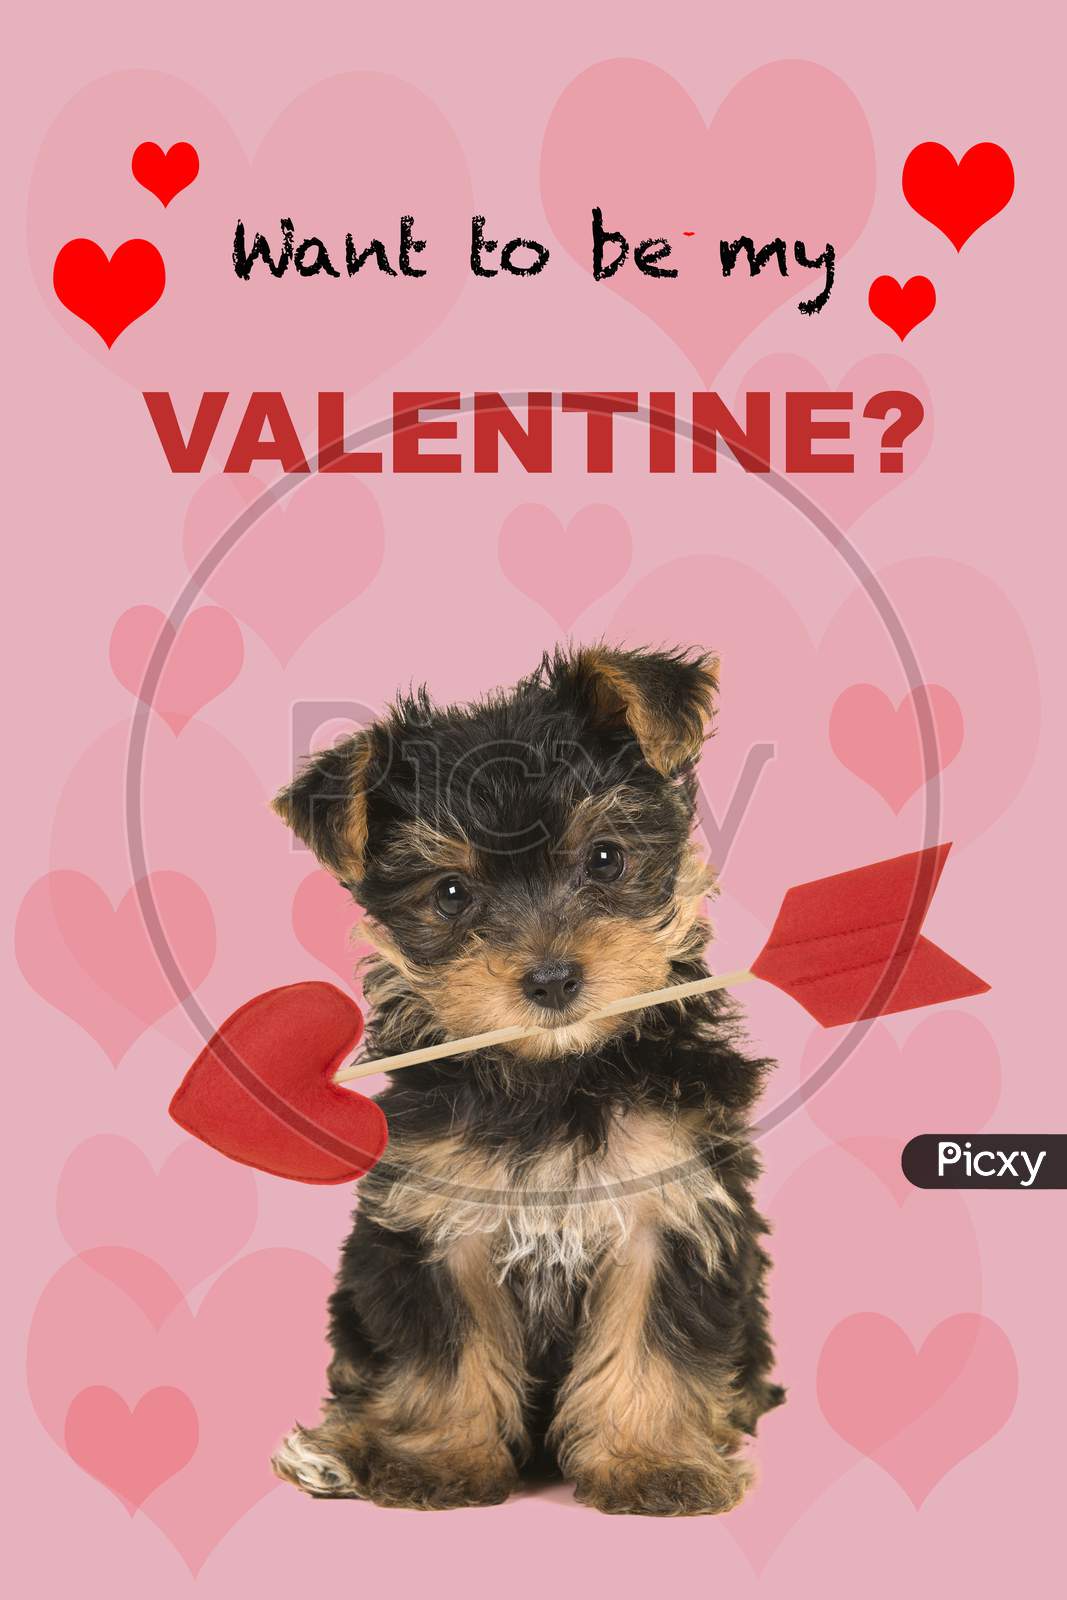 Valentine’S Day Greeting Card With Cute Sitting Valentine Yorkshire Terrier, Yorkie Puppy Looking At The Camera Holding A Love Arrow With The Text Want To Be My Valentine?